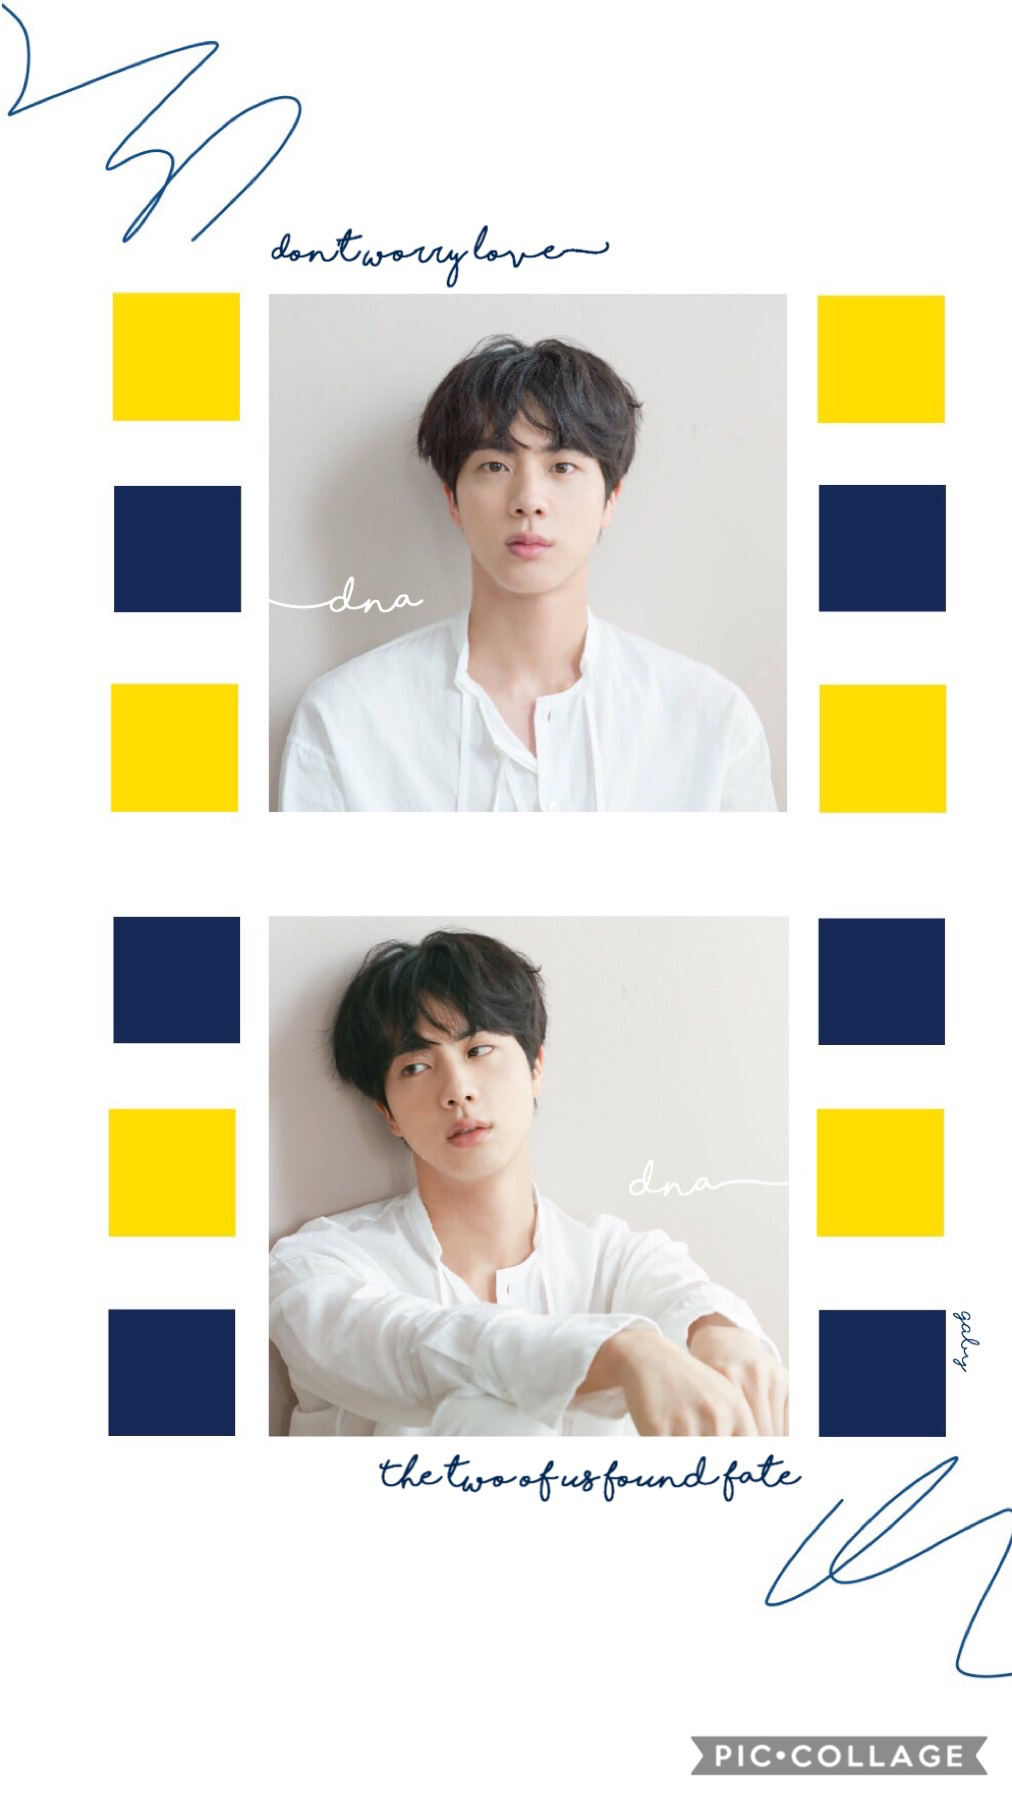 tap! 💙💛
a lot of seokjin lately lol sorry bout that
or am i? ;)
anyhoo this was a challenge thing for krush but I sadly left.
ALSO CHECK OUT MY SPARE ACC @jaesthetics BECAUSE ILL POST SOME SIDE STUFF THERE K BYE 
Also hi mell 